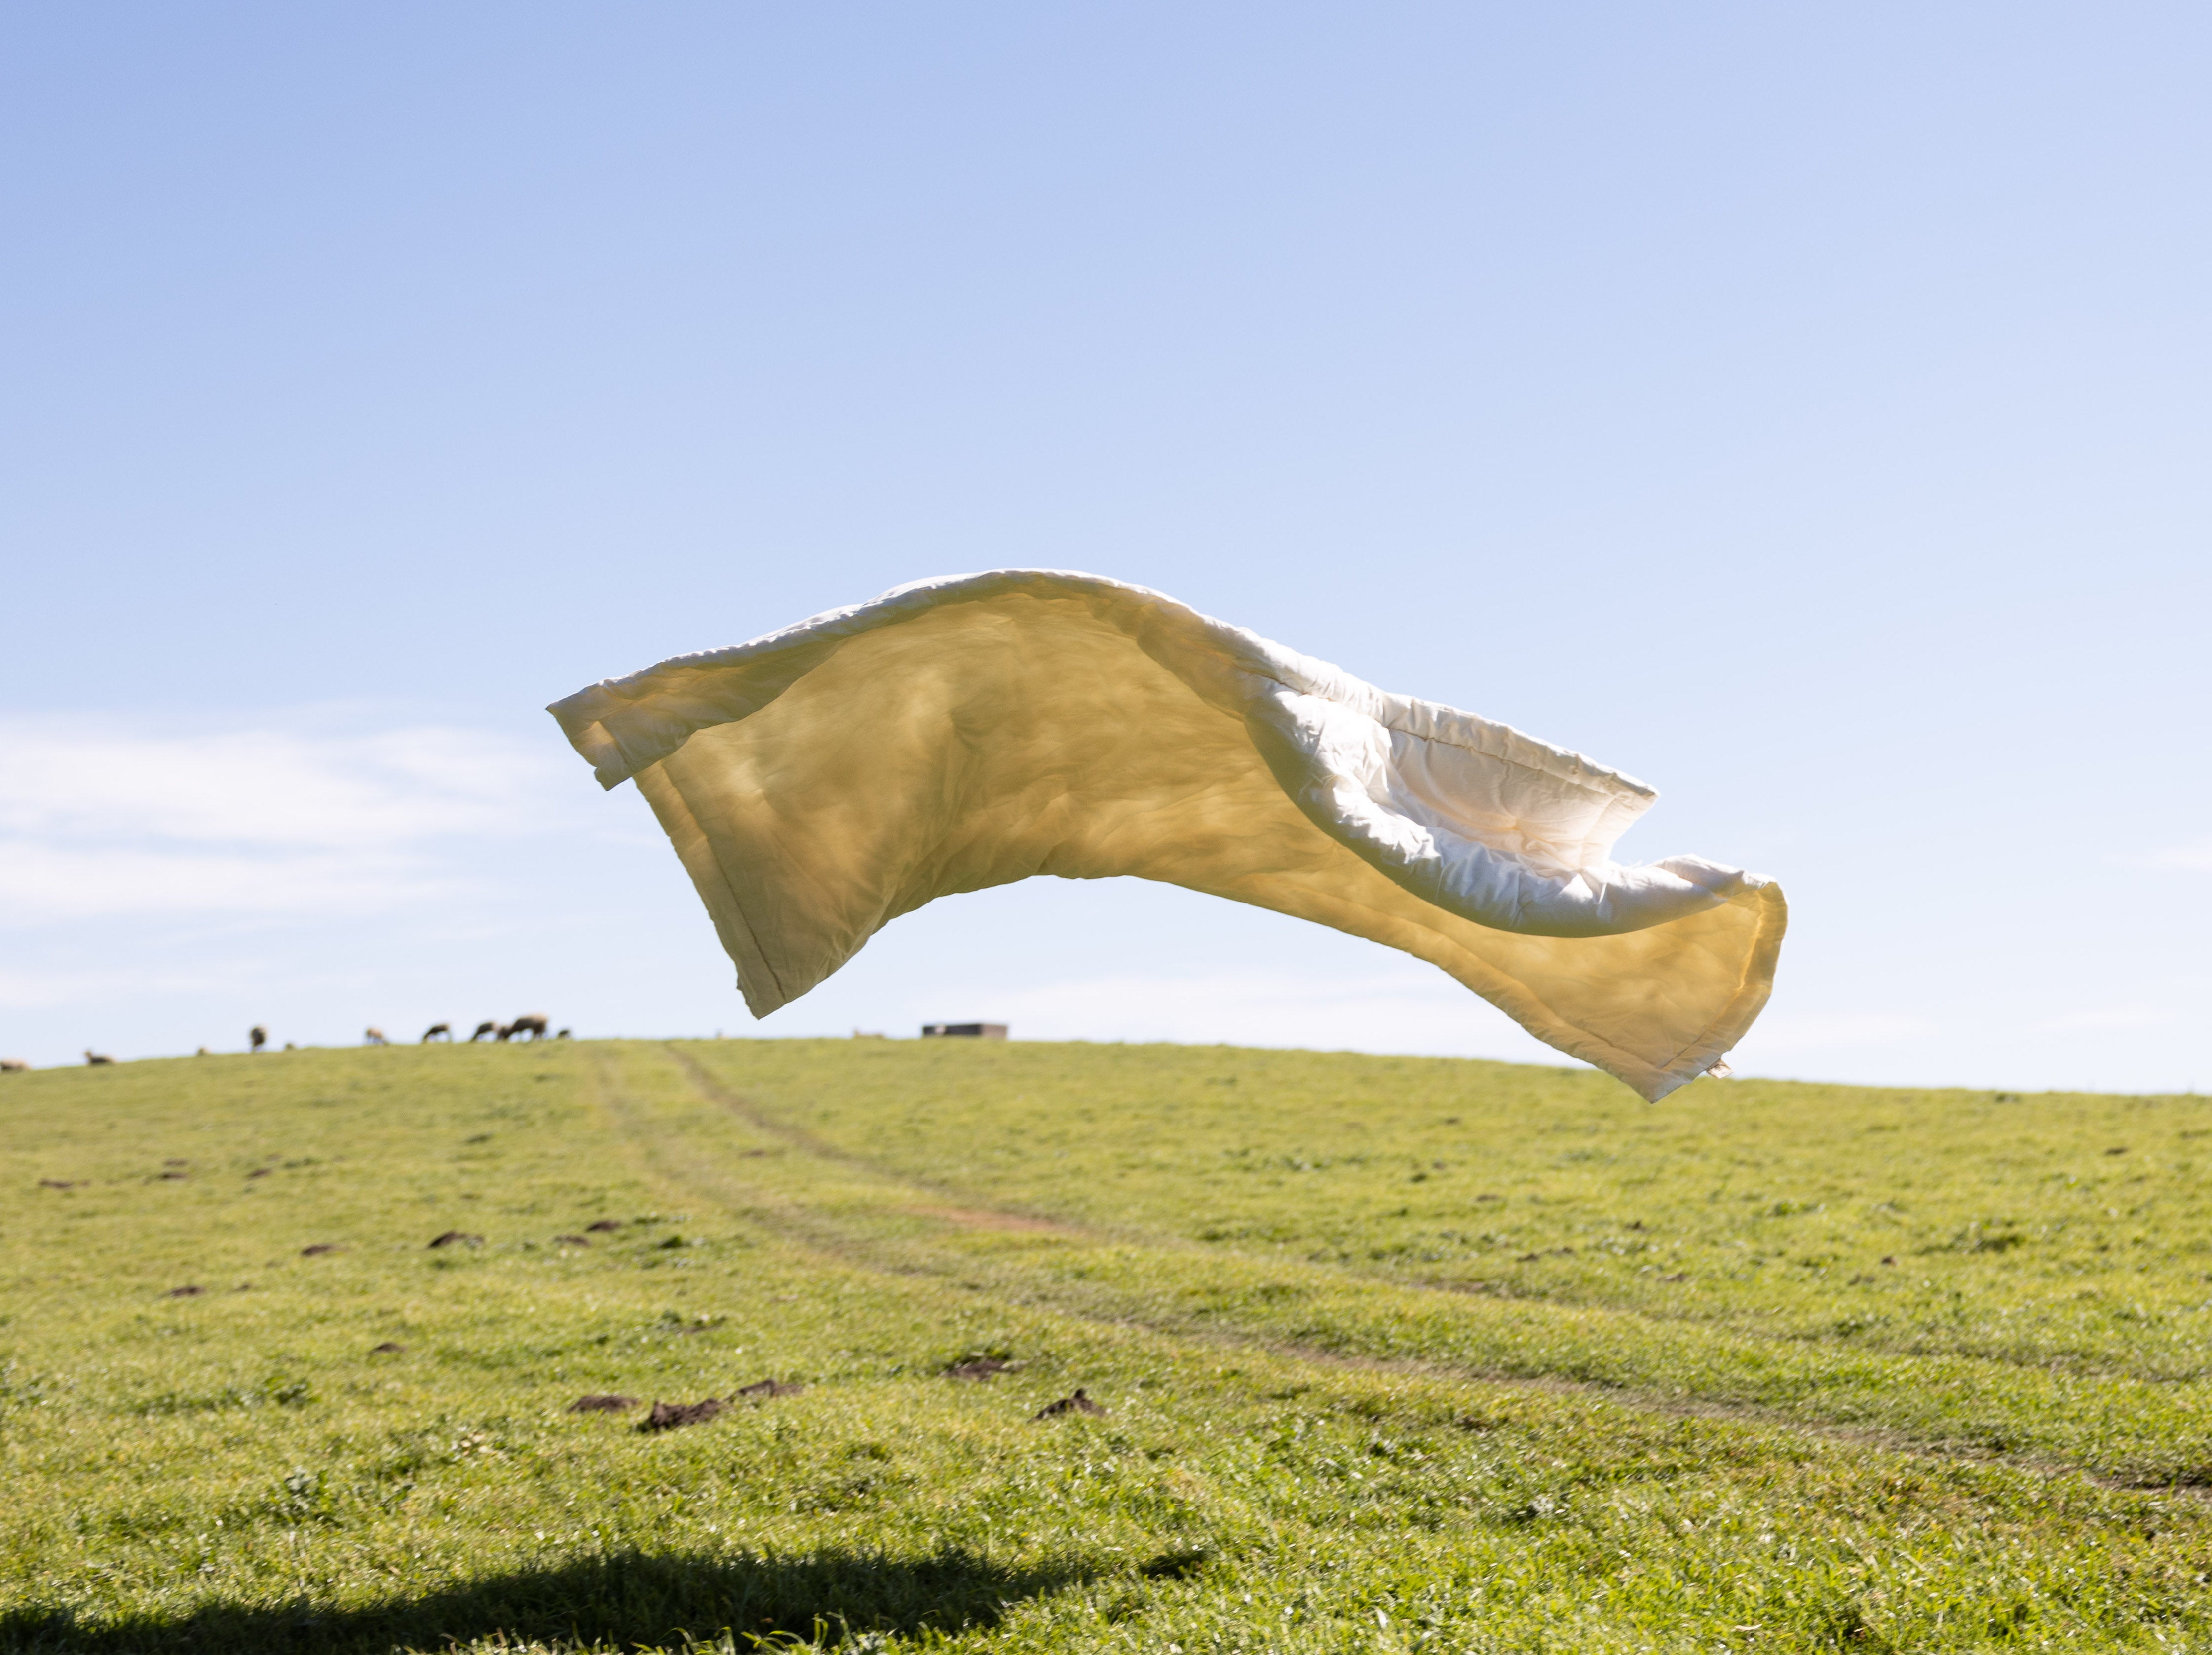 Sonoma Wool Company Comforter falling from the sky over a green field